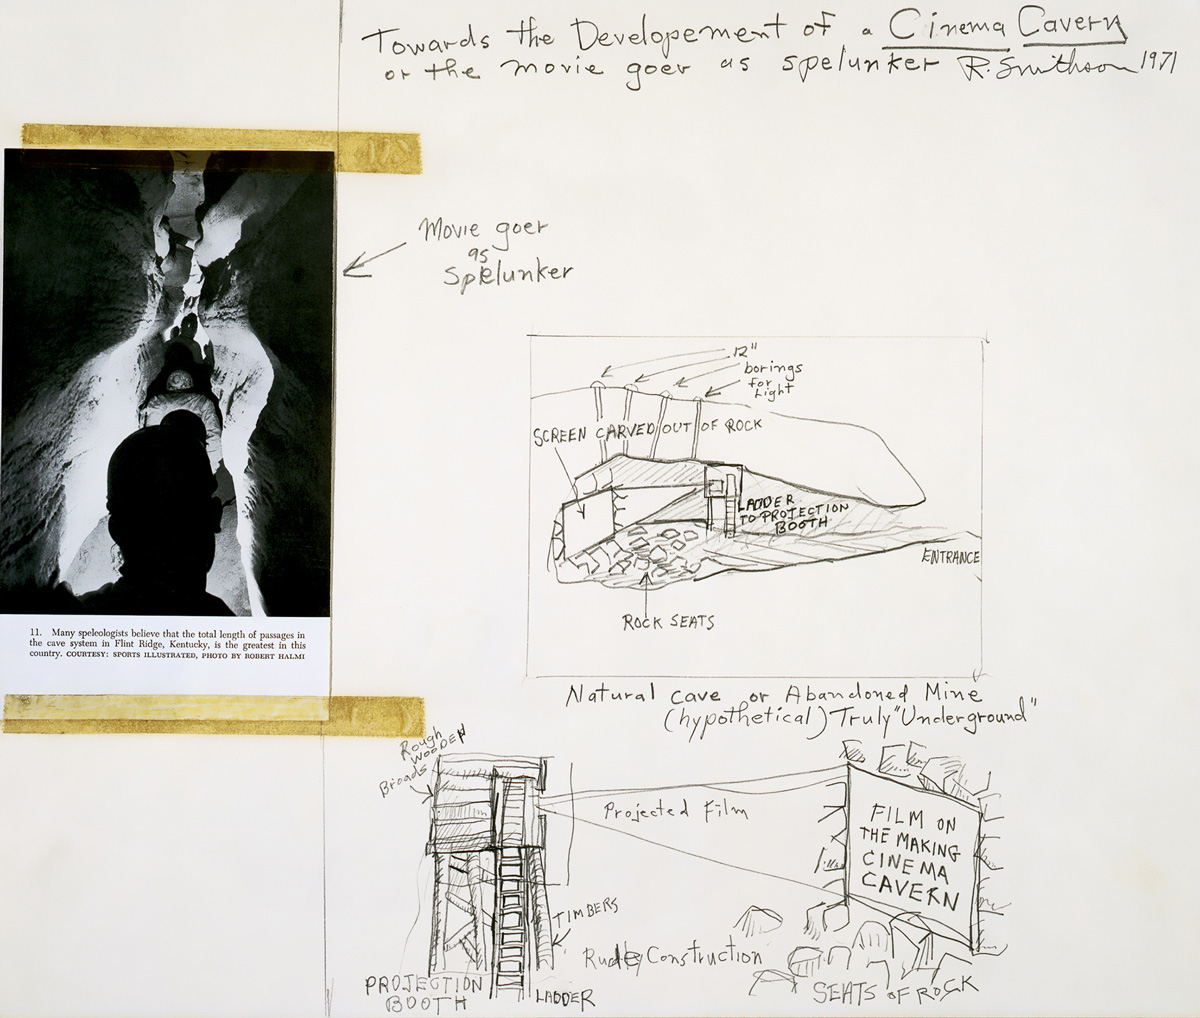 Robert Smithson’s nineteen seventy-one sketch titled “Towards the Development of a Cinema Cavern,” depicting designs for the underground cinema.